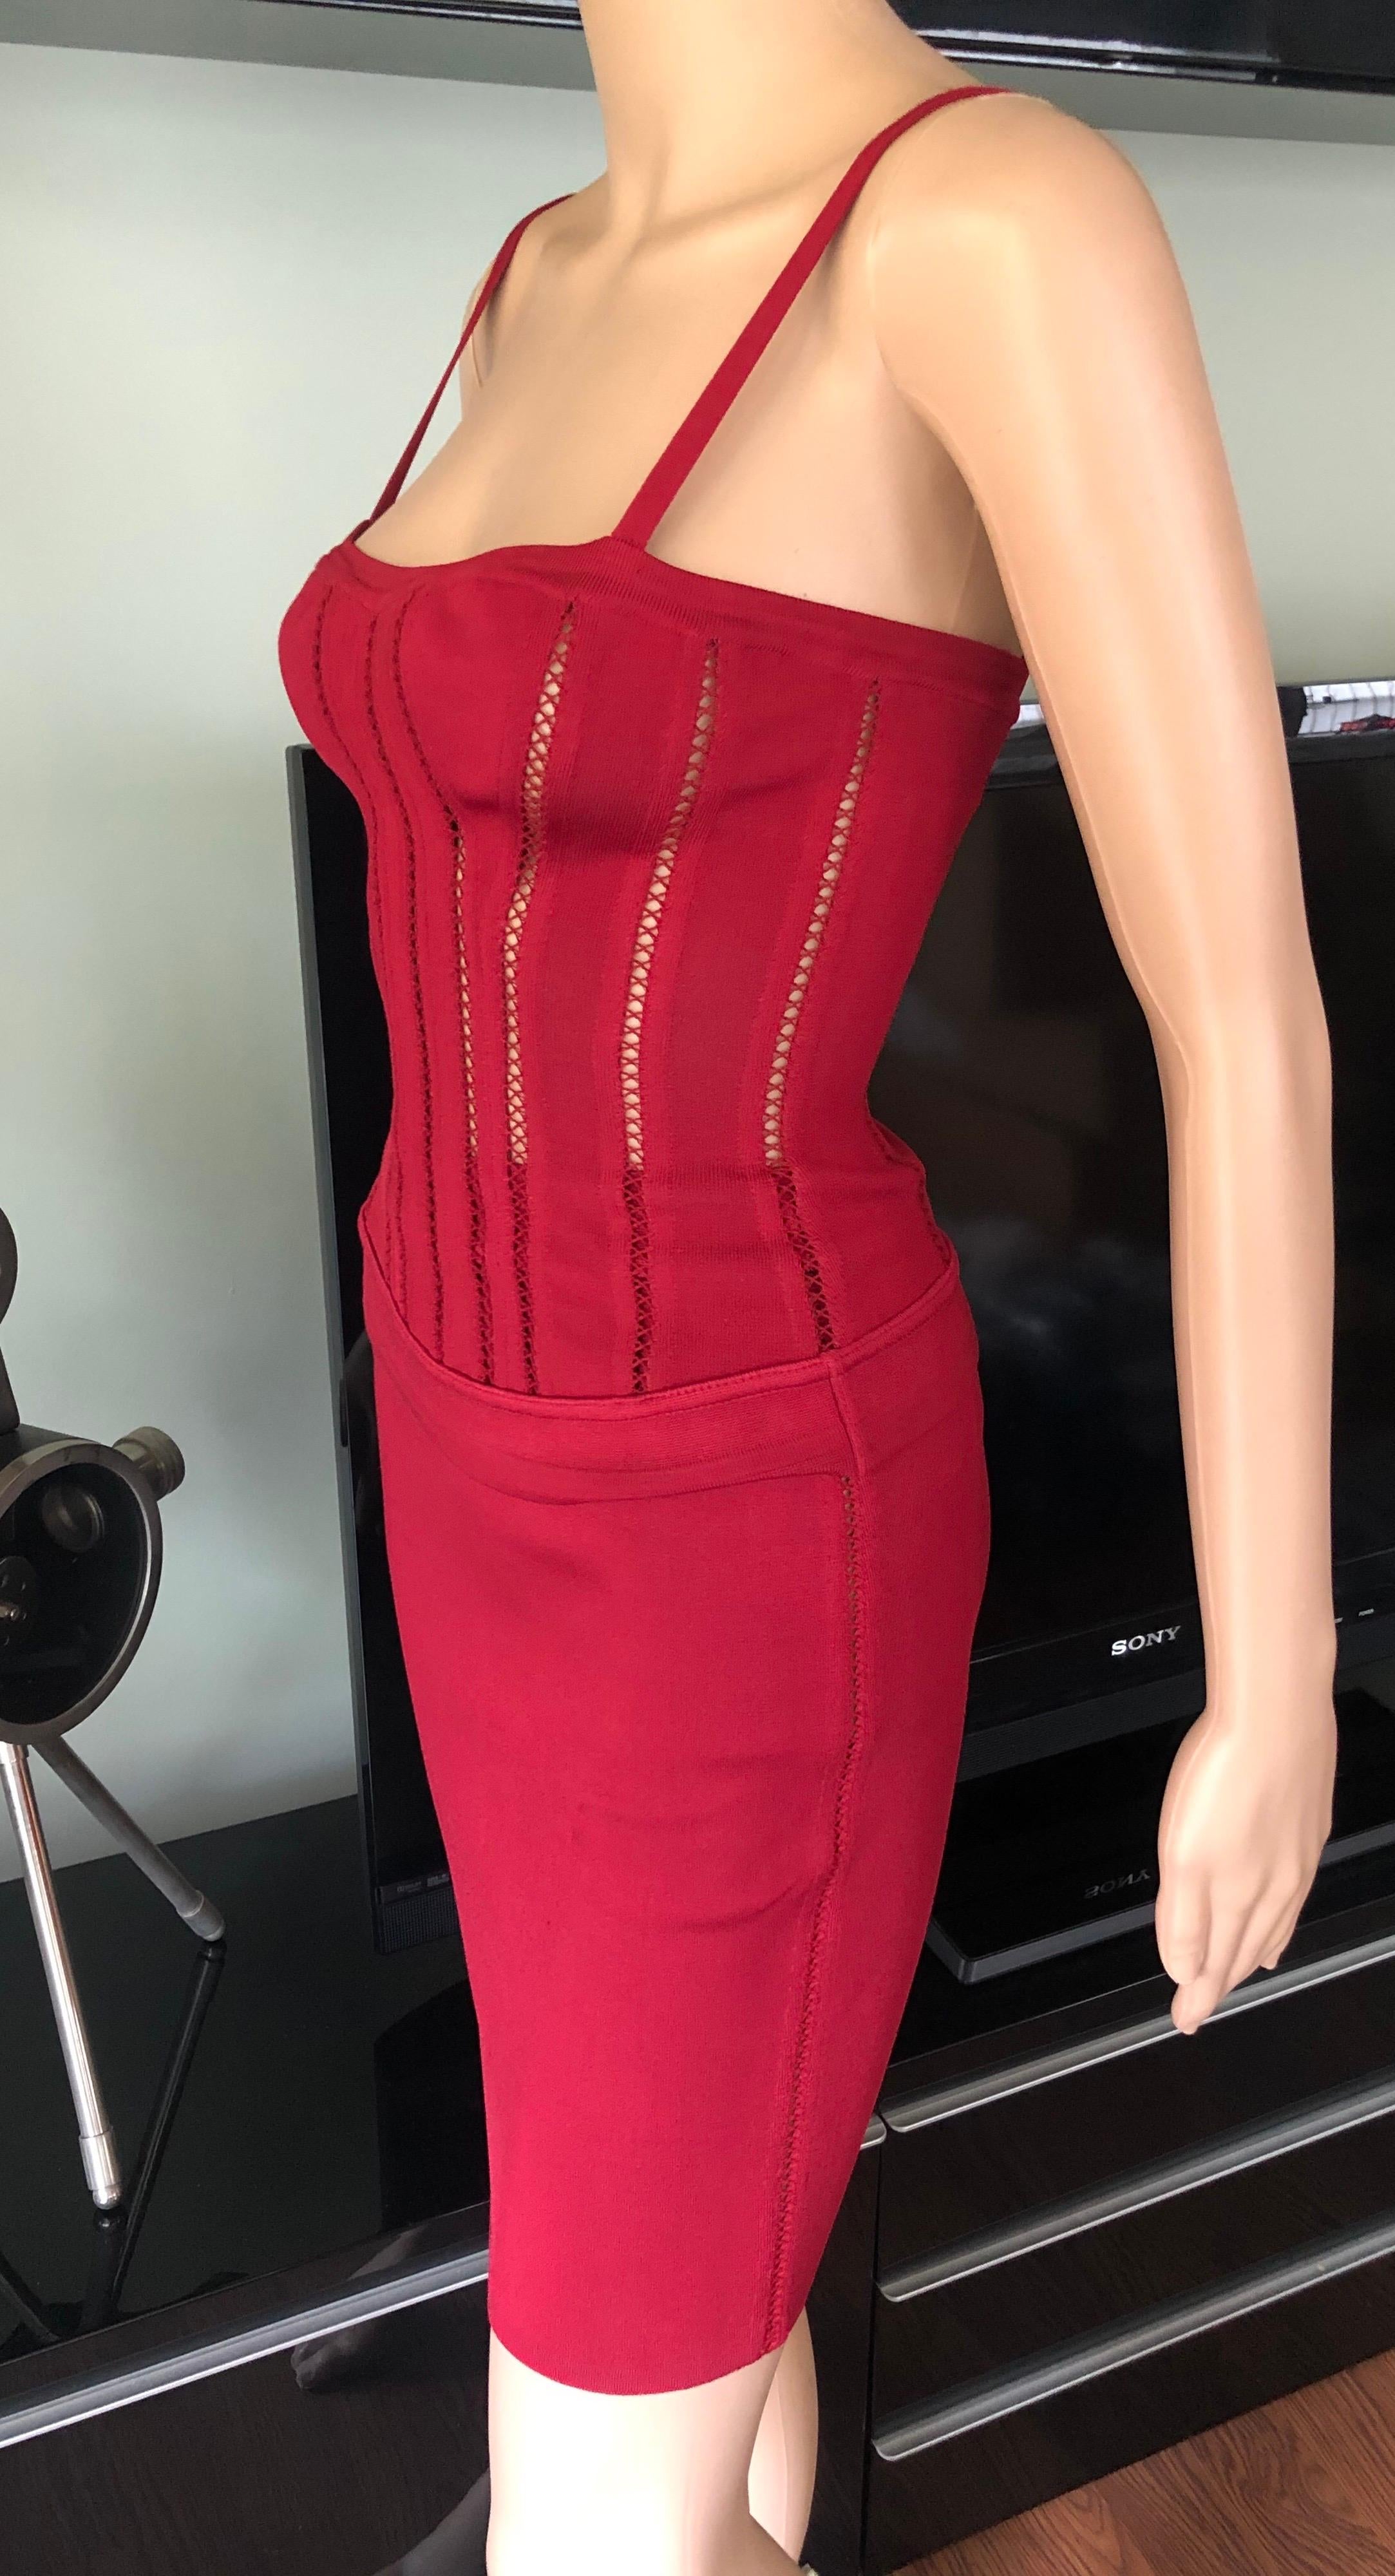 Azzedine Alaia F/W 1991 Vintage Skirt and Bustier Corset Top 2 Piece Set  In Good Condition For Sale In Naples, FL